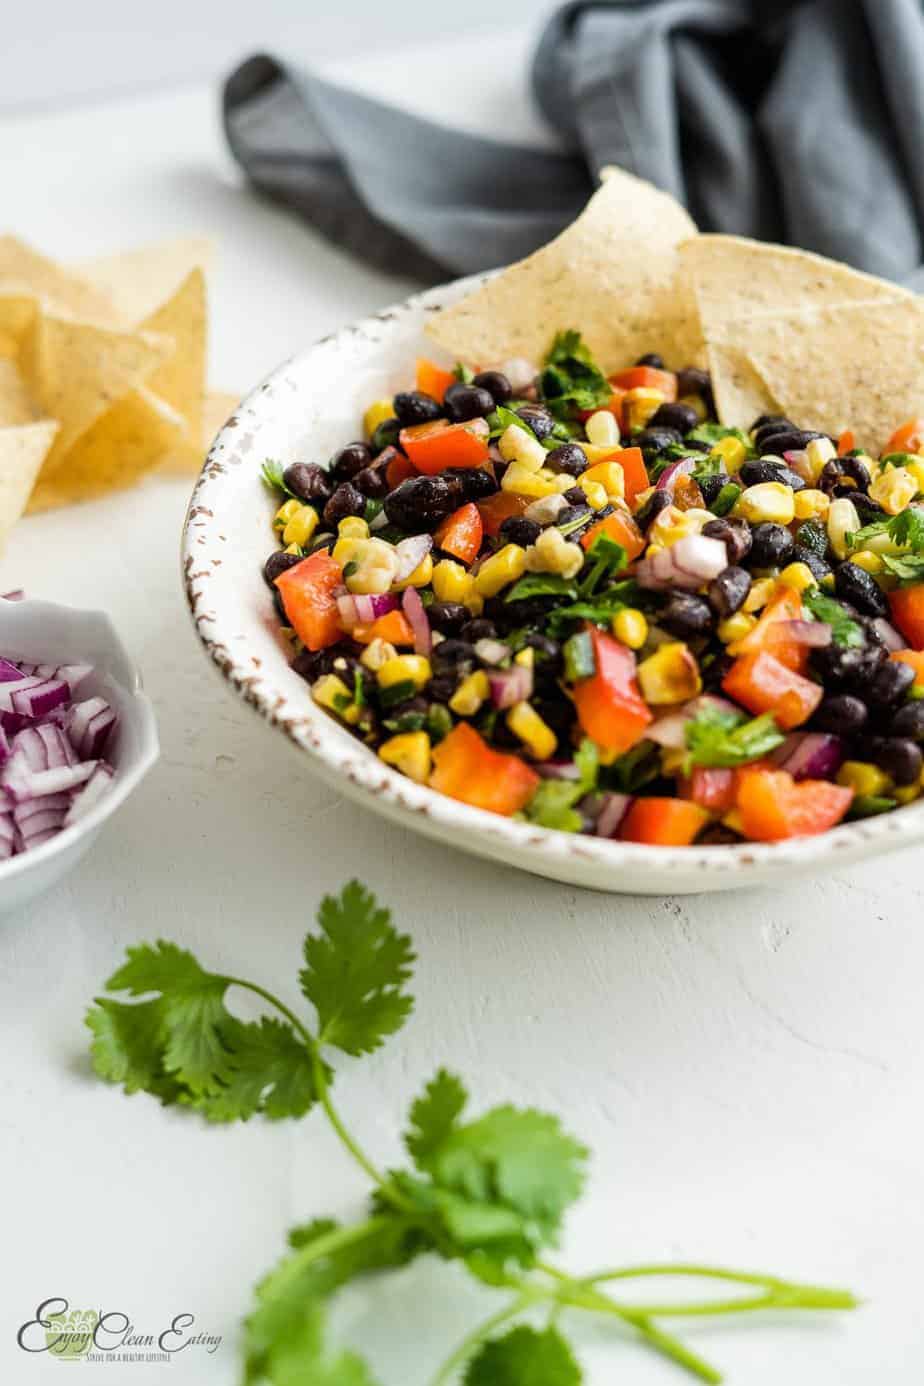 The salsa was serve with tortilla chips on the side there is chopped red onion in a white small bowl, cilantro and some chips on the side.